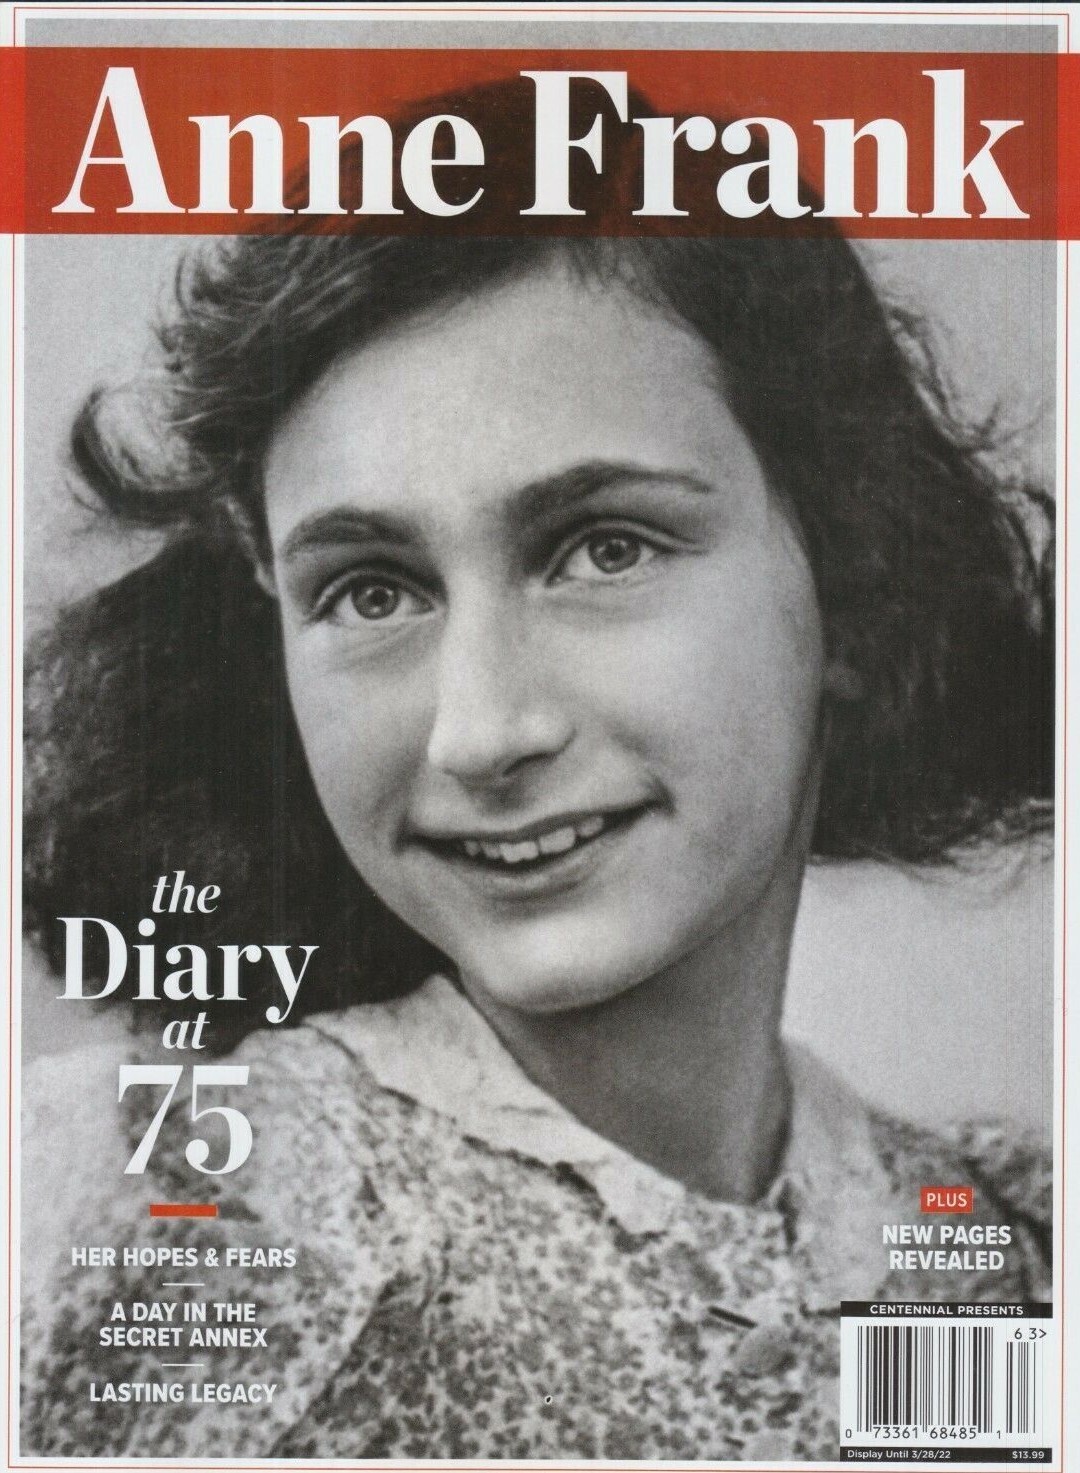 Anne Frank: The Diary at 75 -2022 Magazine Special Edition